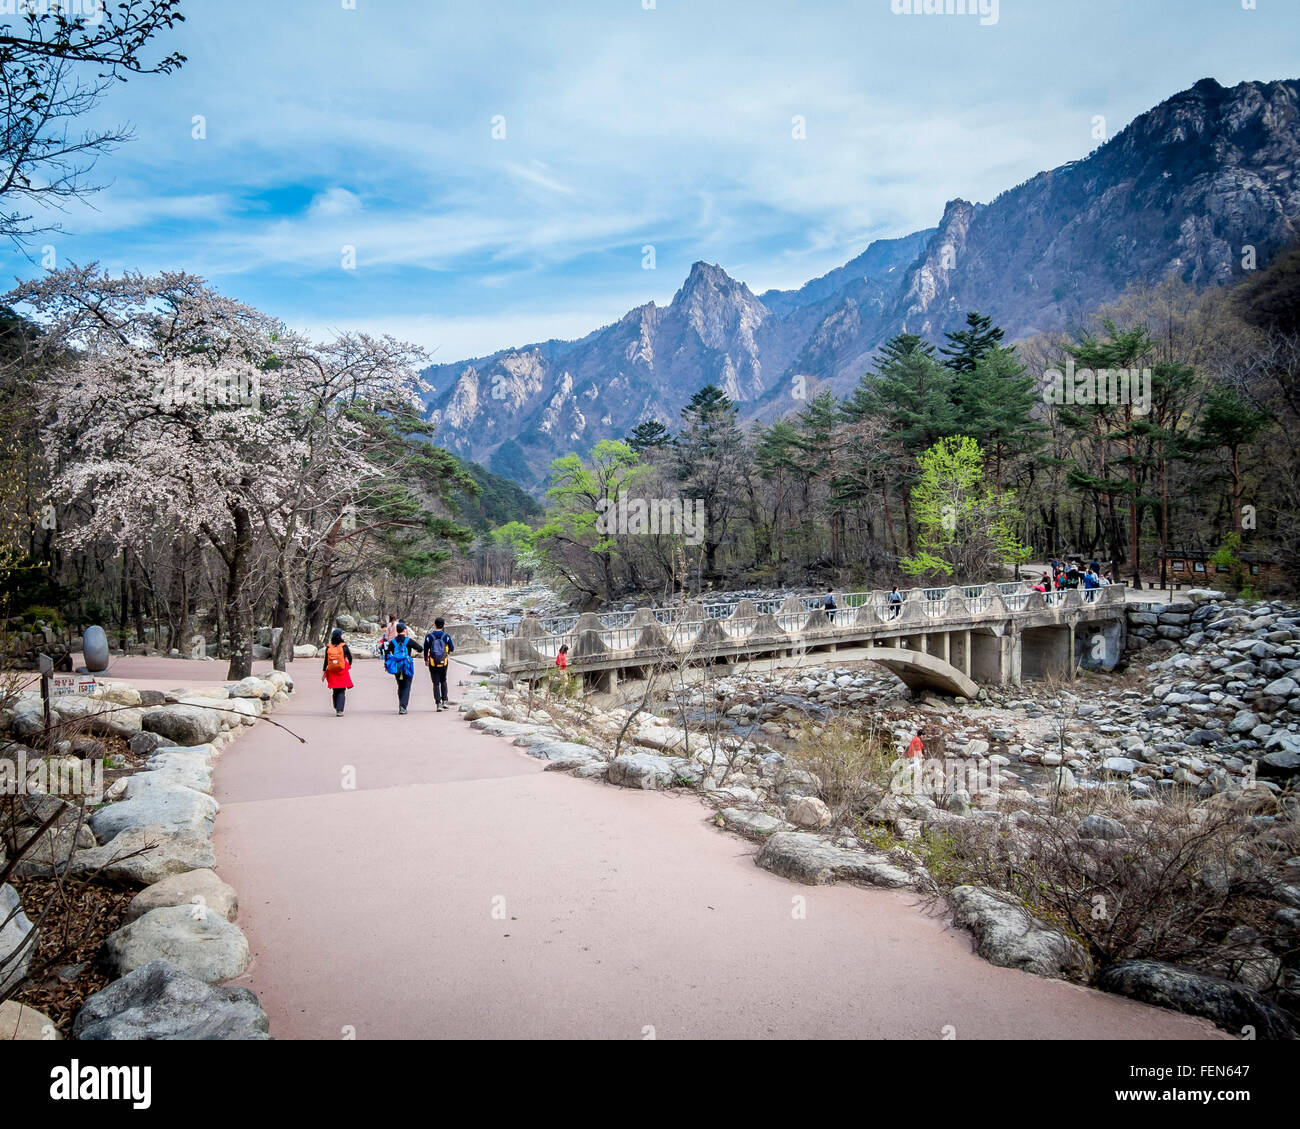 People walk towards a bridge, backed with rugged mountains. You can tell it is Spring because there are Cherry blossoms. Stock Photo